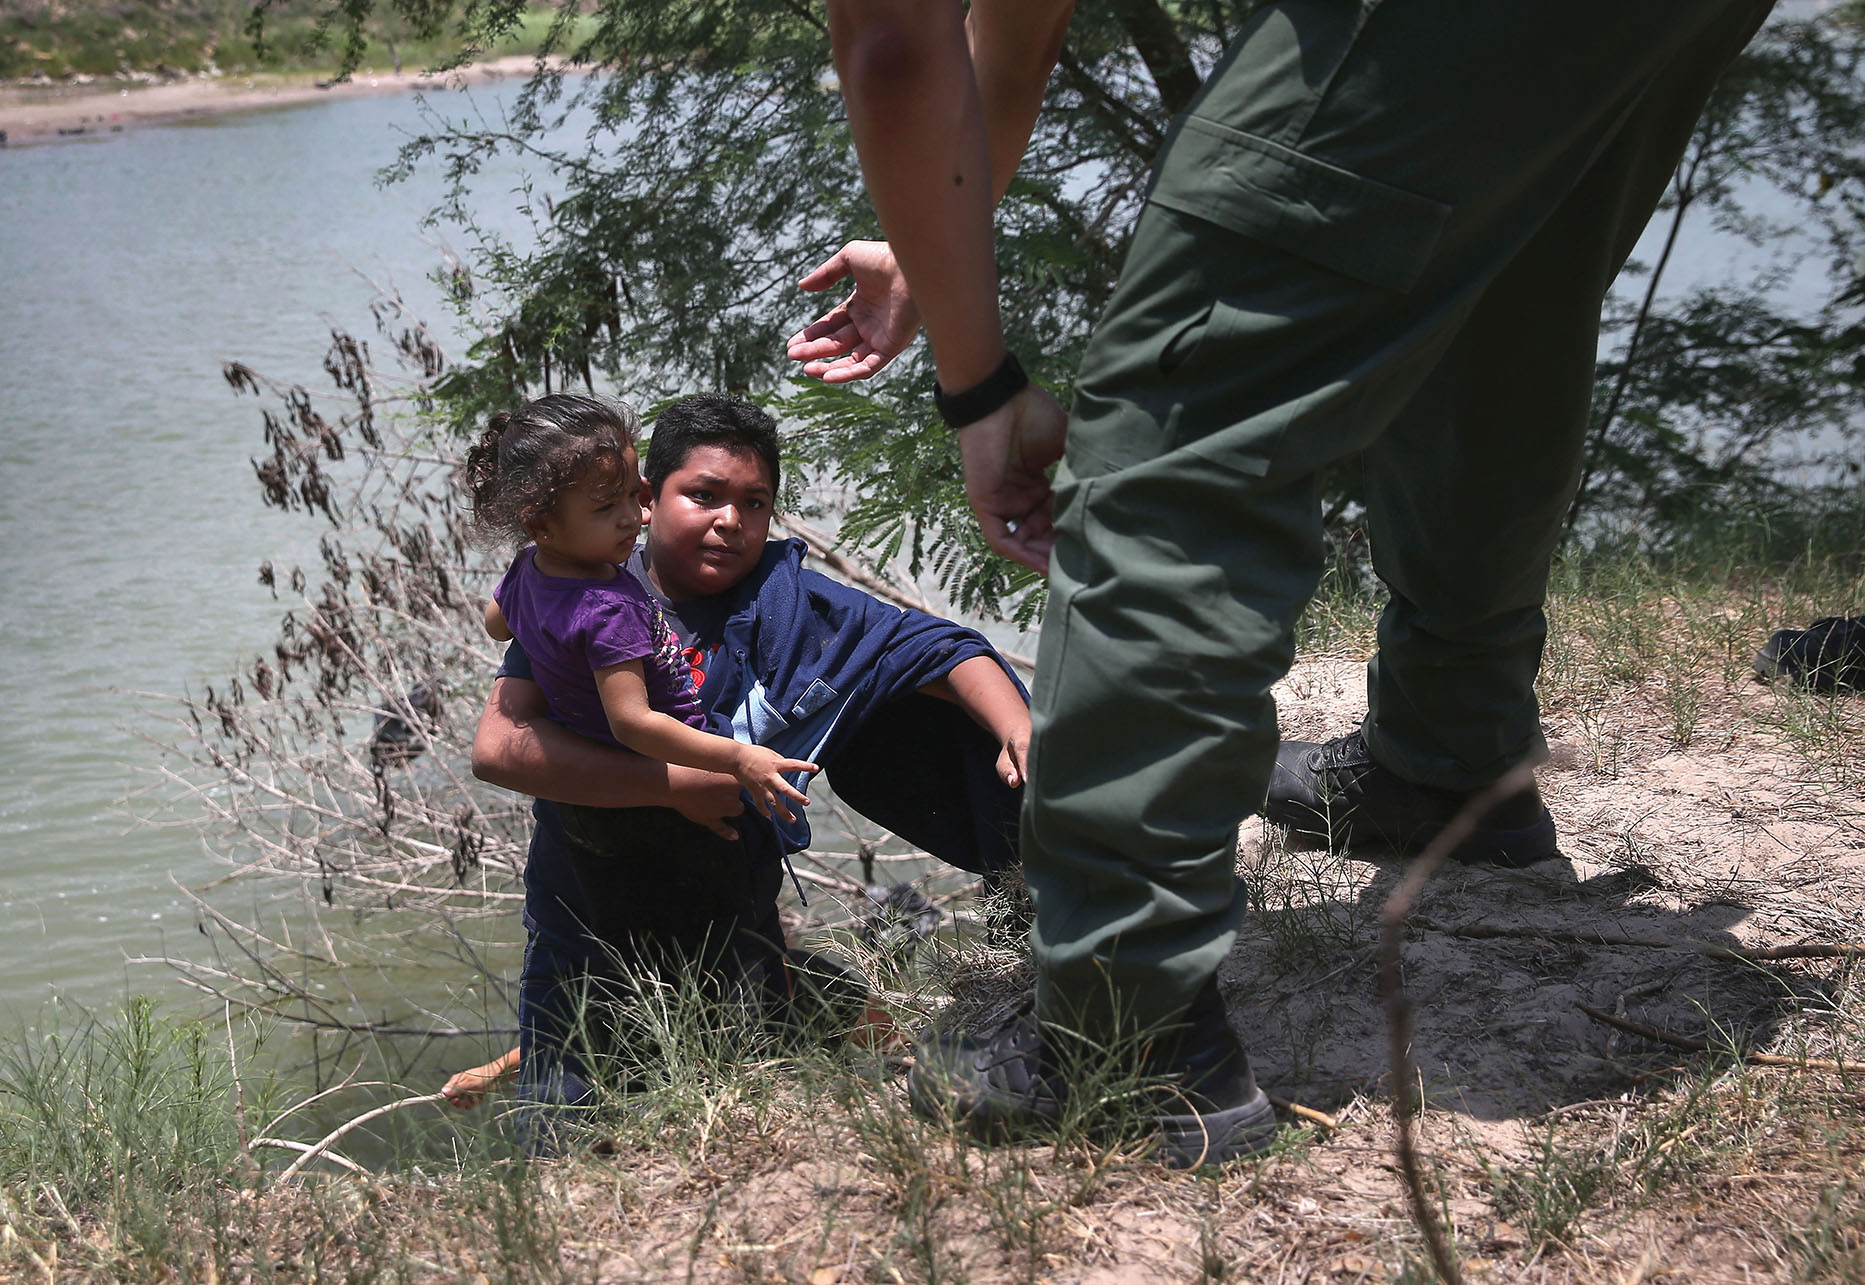 A U.S. Border Patrol agent assists undocumented minors up out of the water while crossing the Río Grande in July 2014. (Photo by John Moore/Getty Images.)